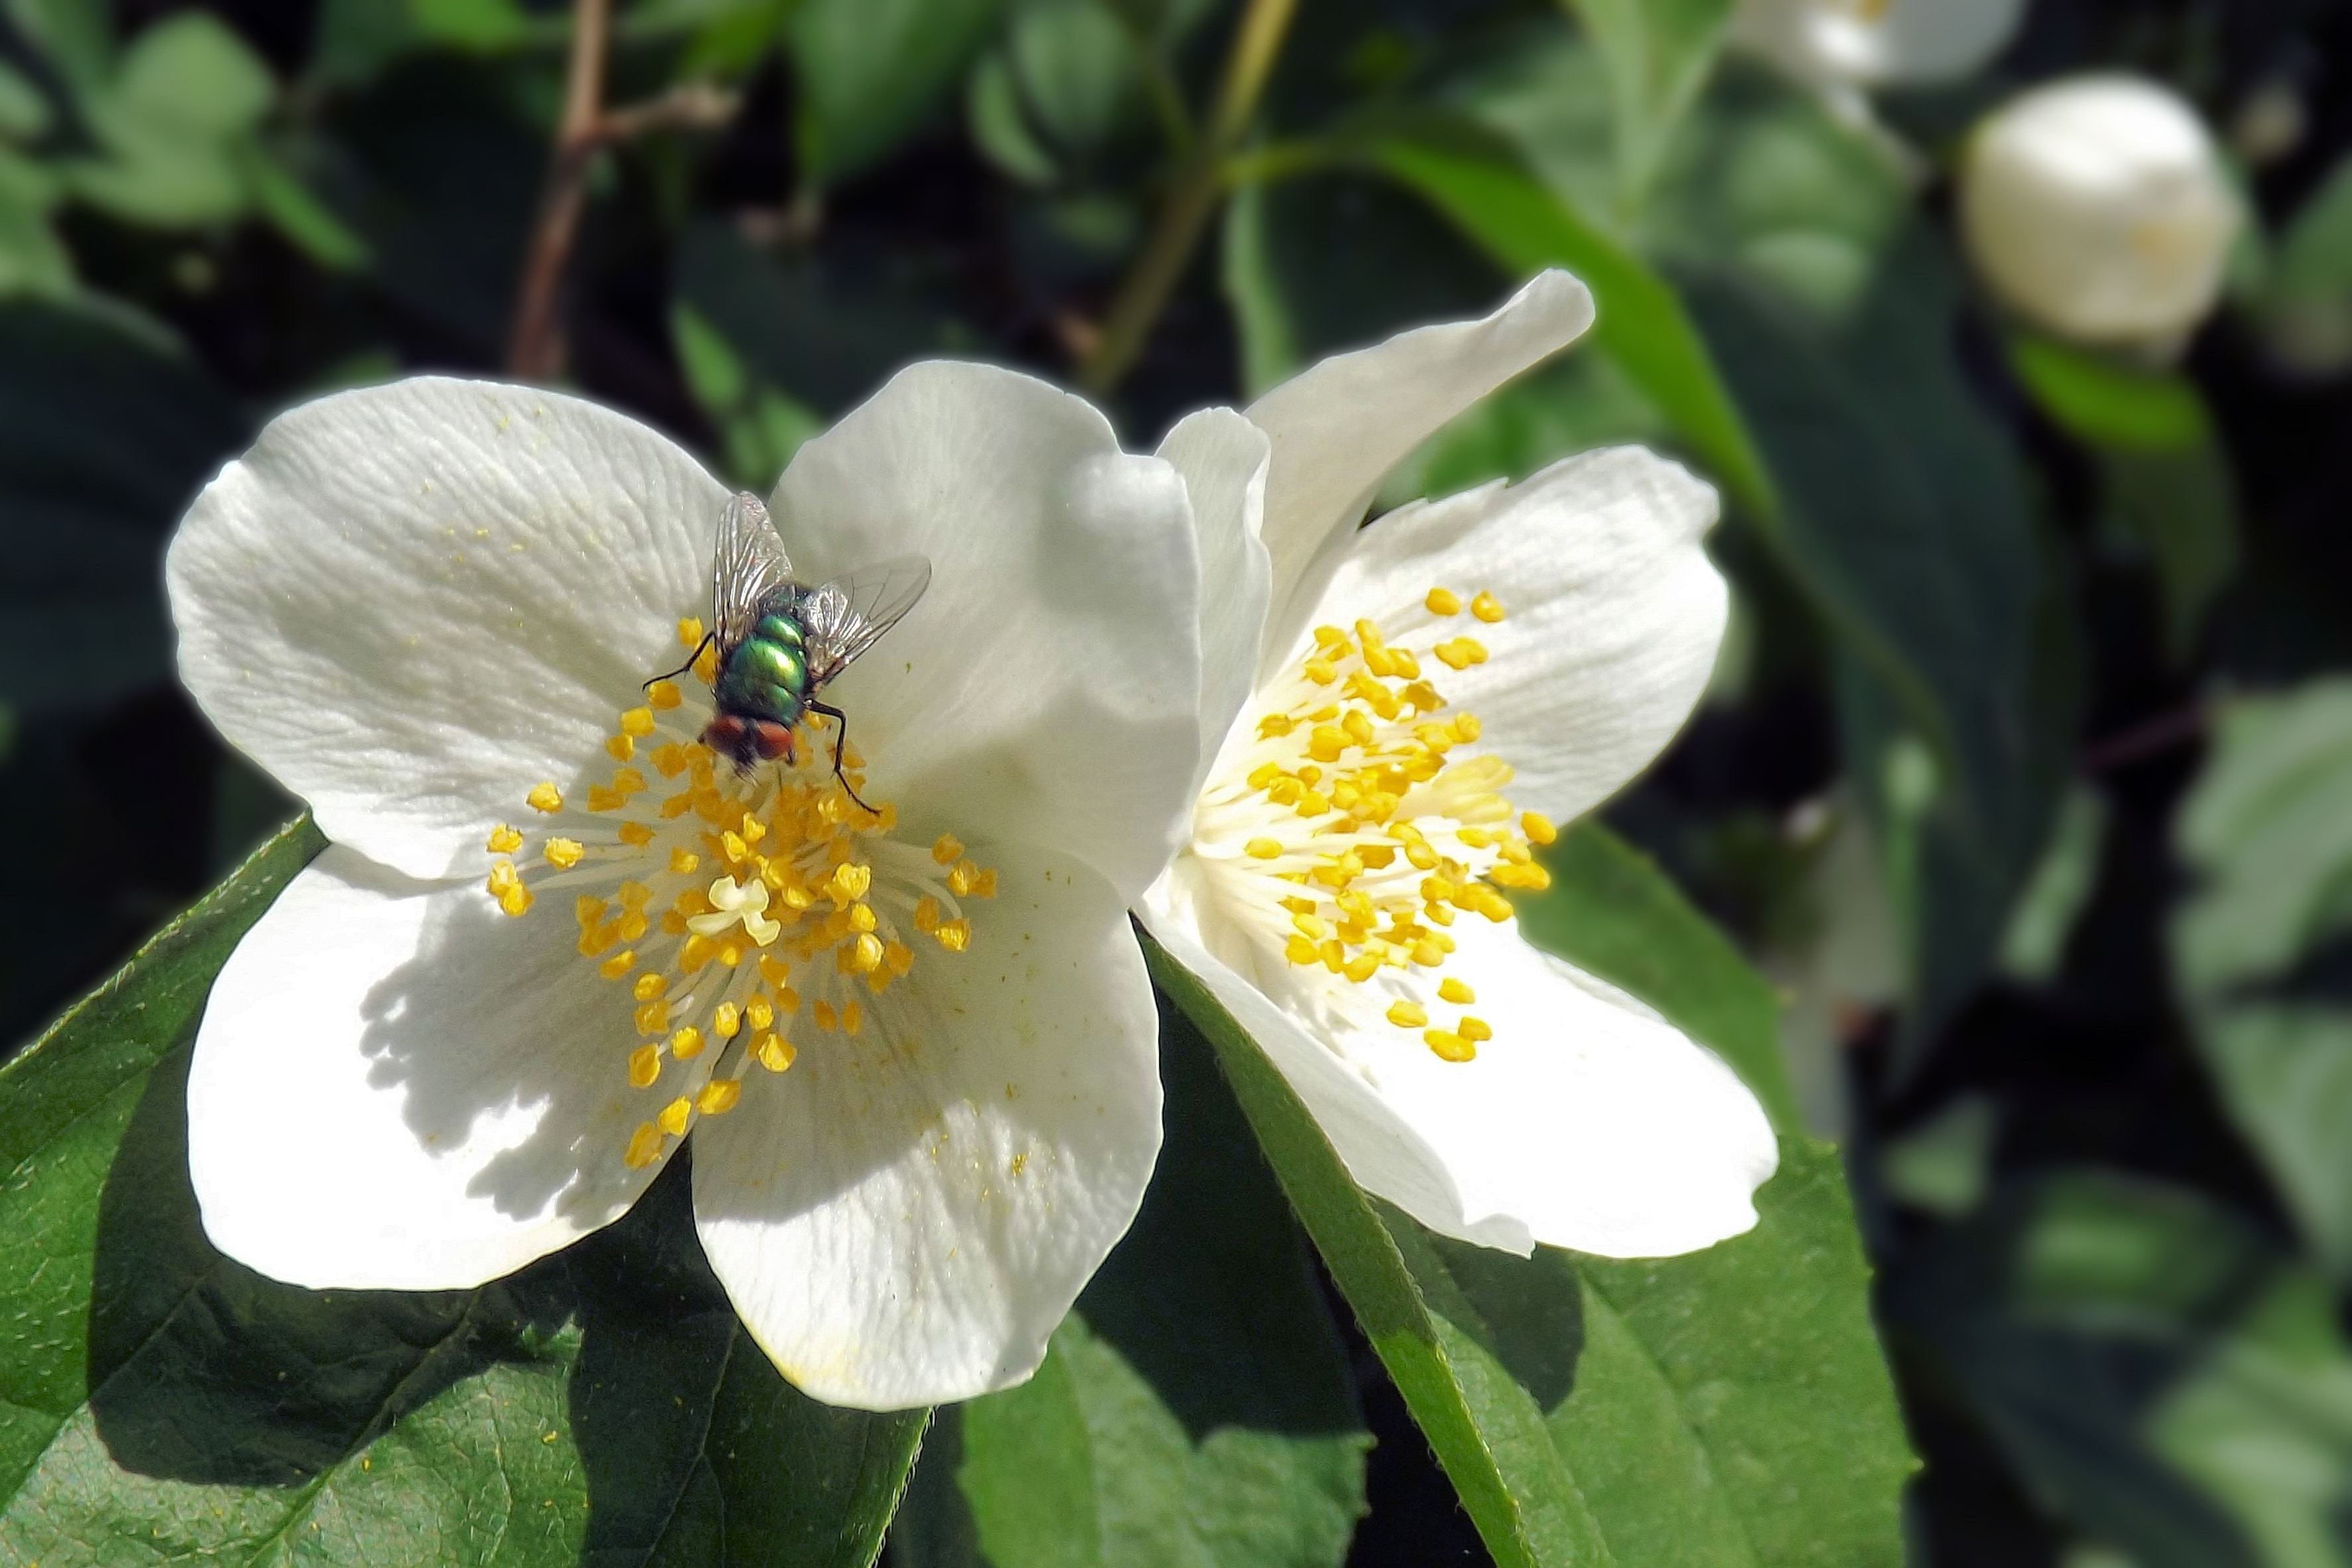 green grey flies and white flower